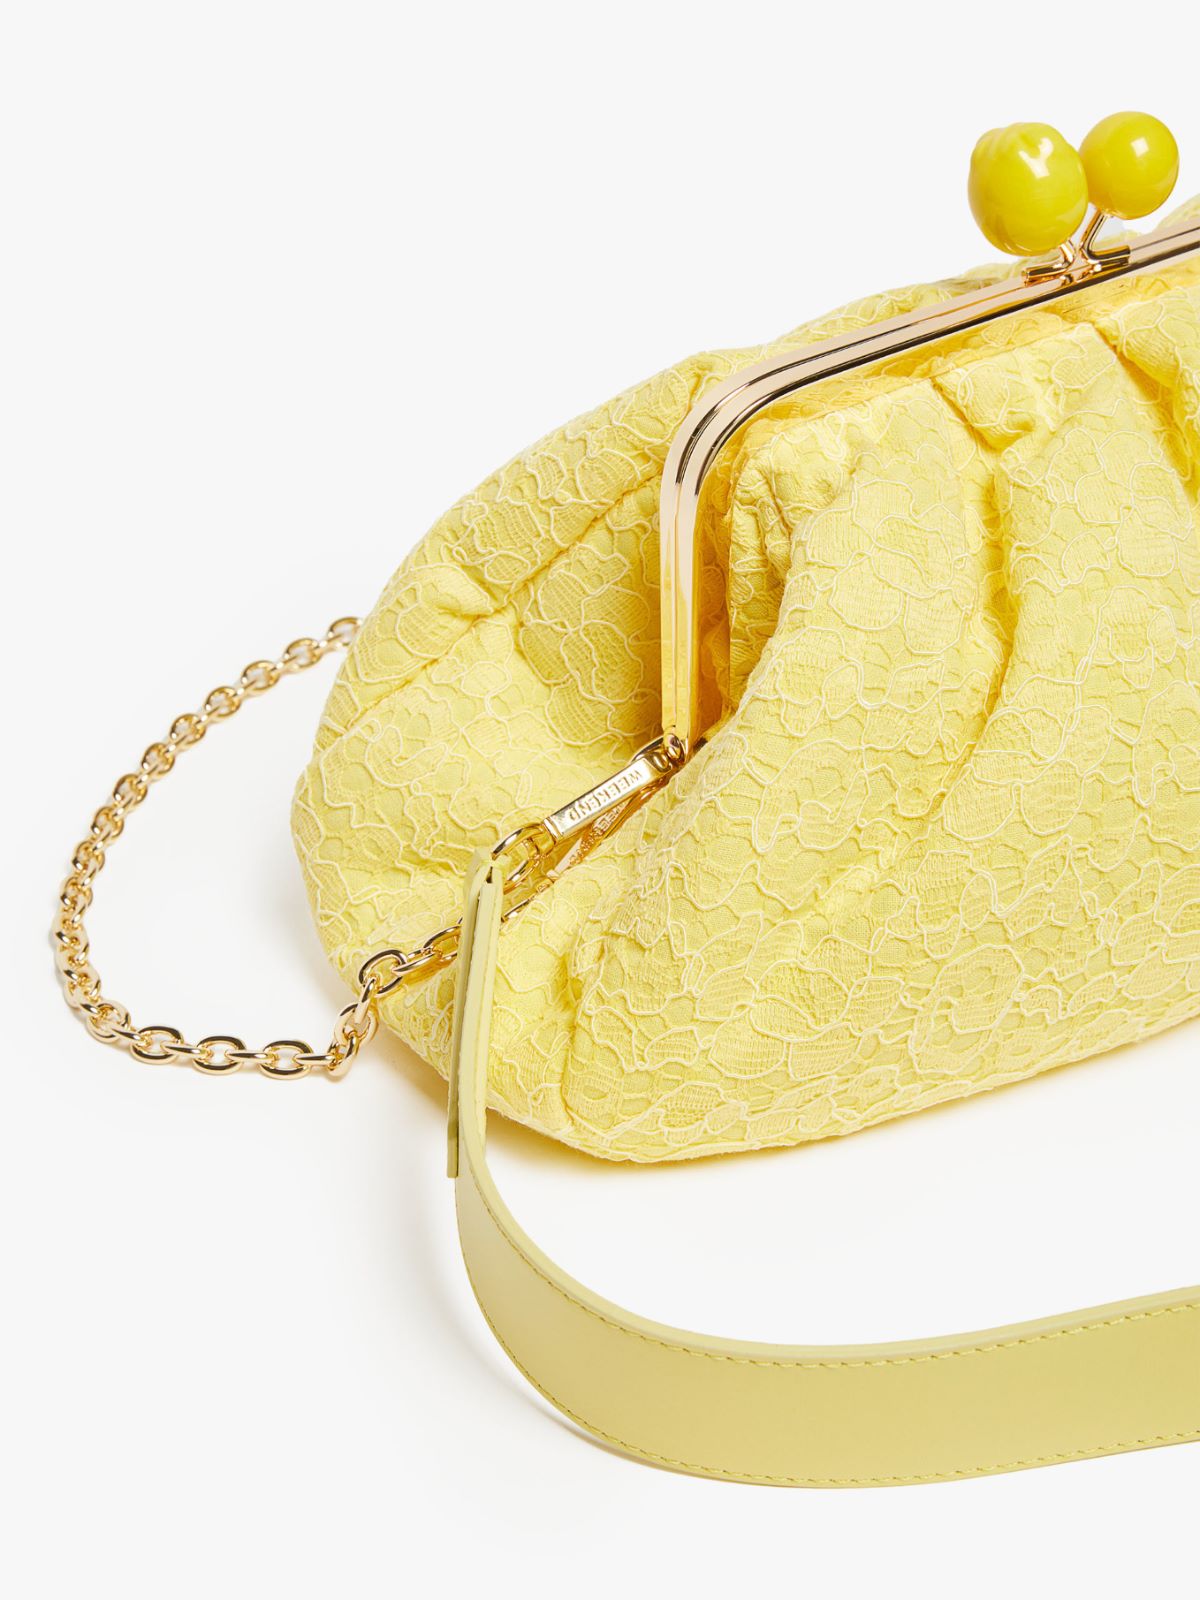 Hommage à la France Pasticcino Bag in lace - BRIGHT YELLOW - Weekend Max Mara - 5